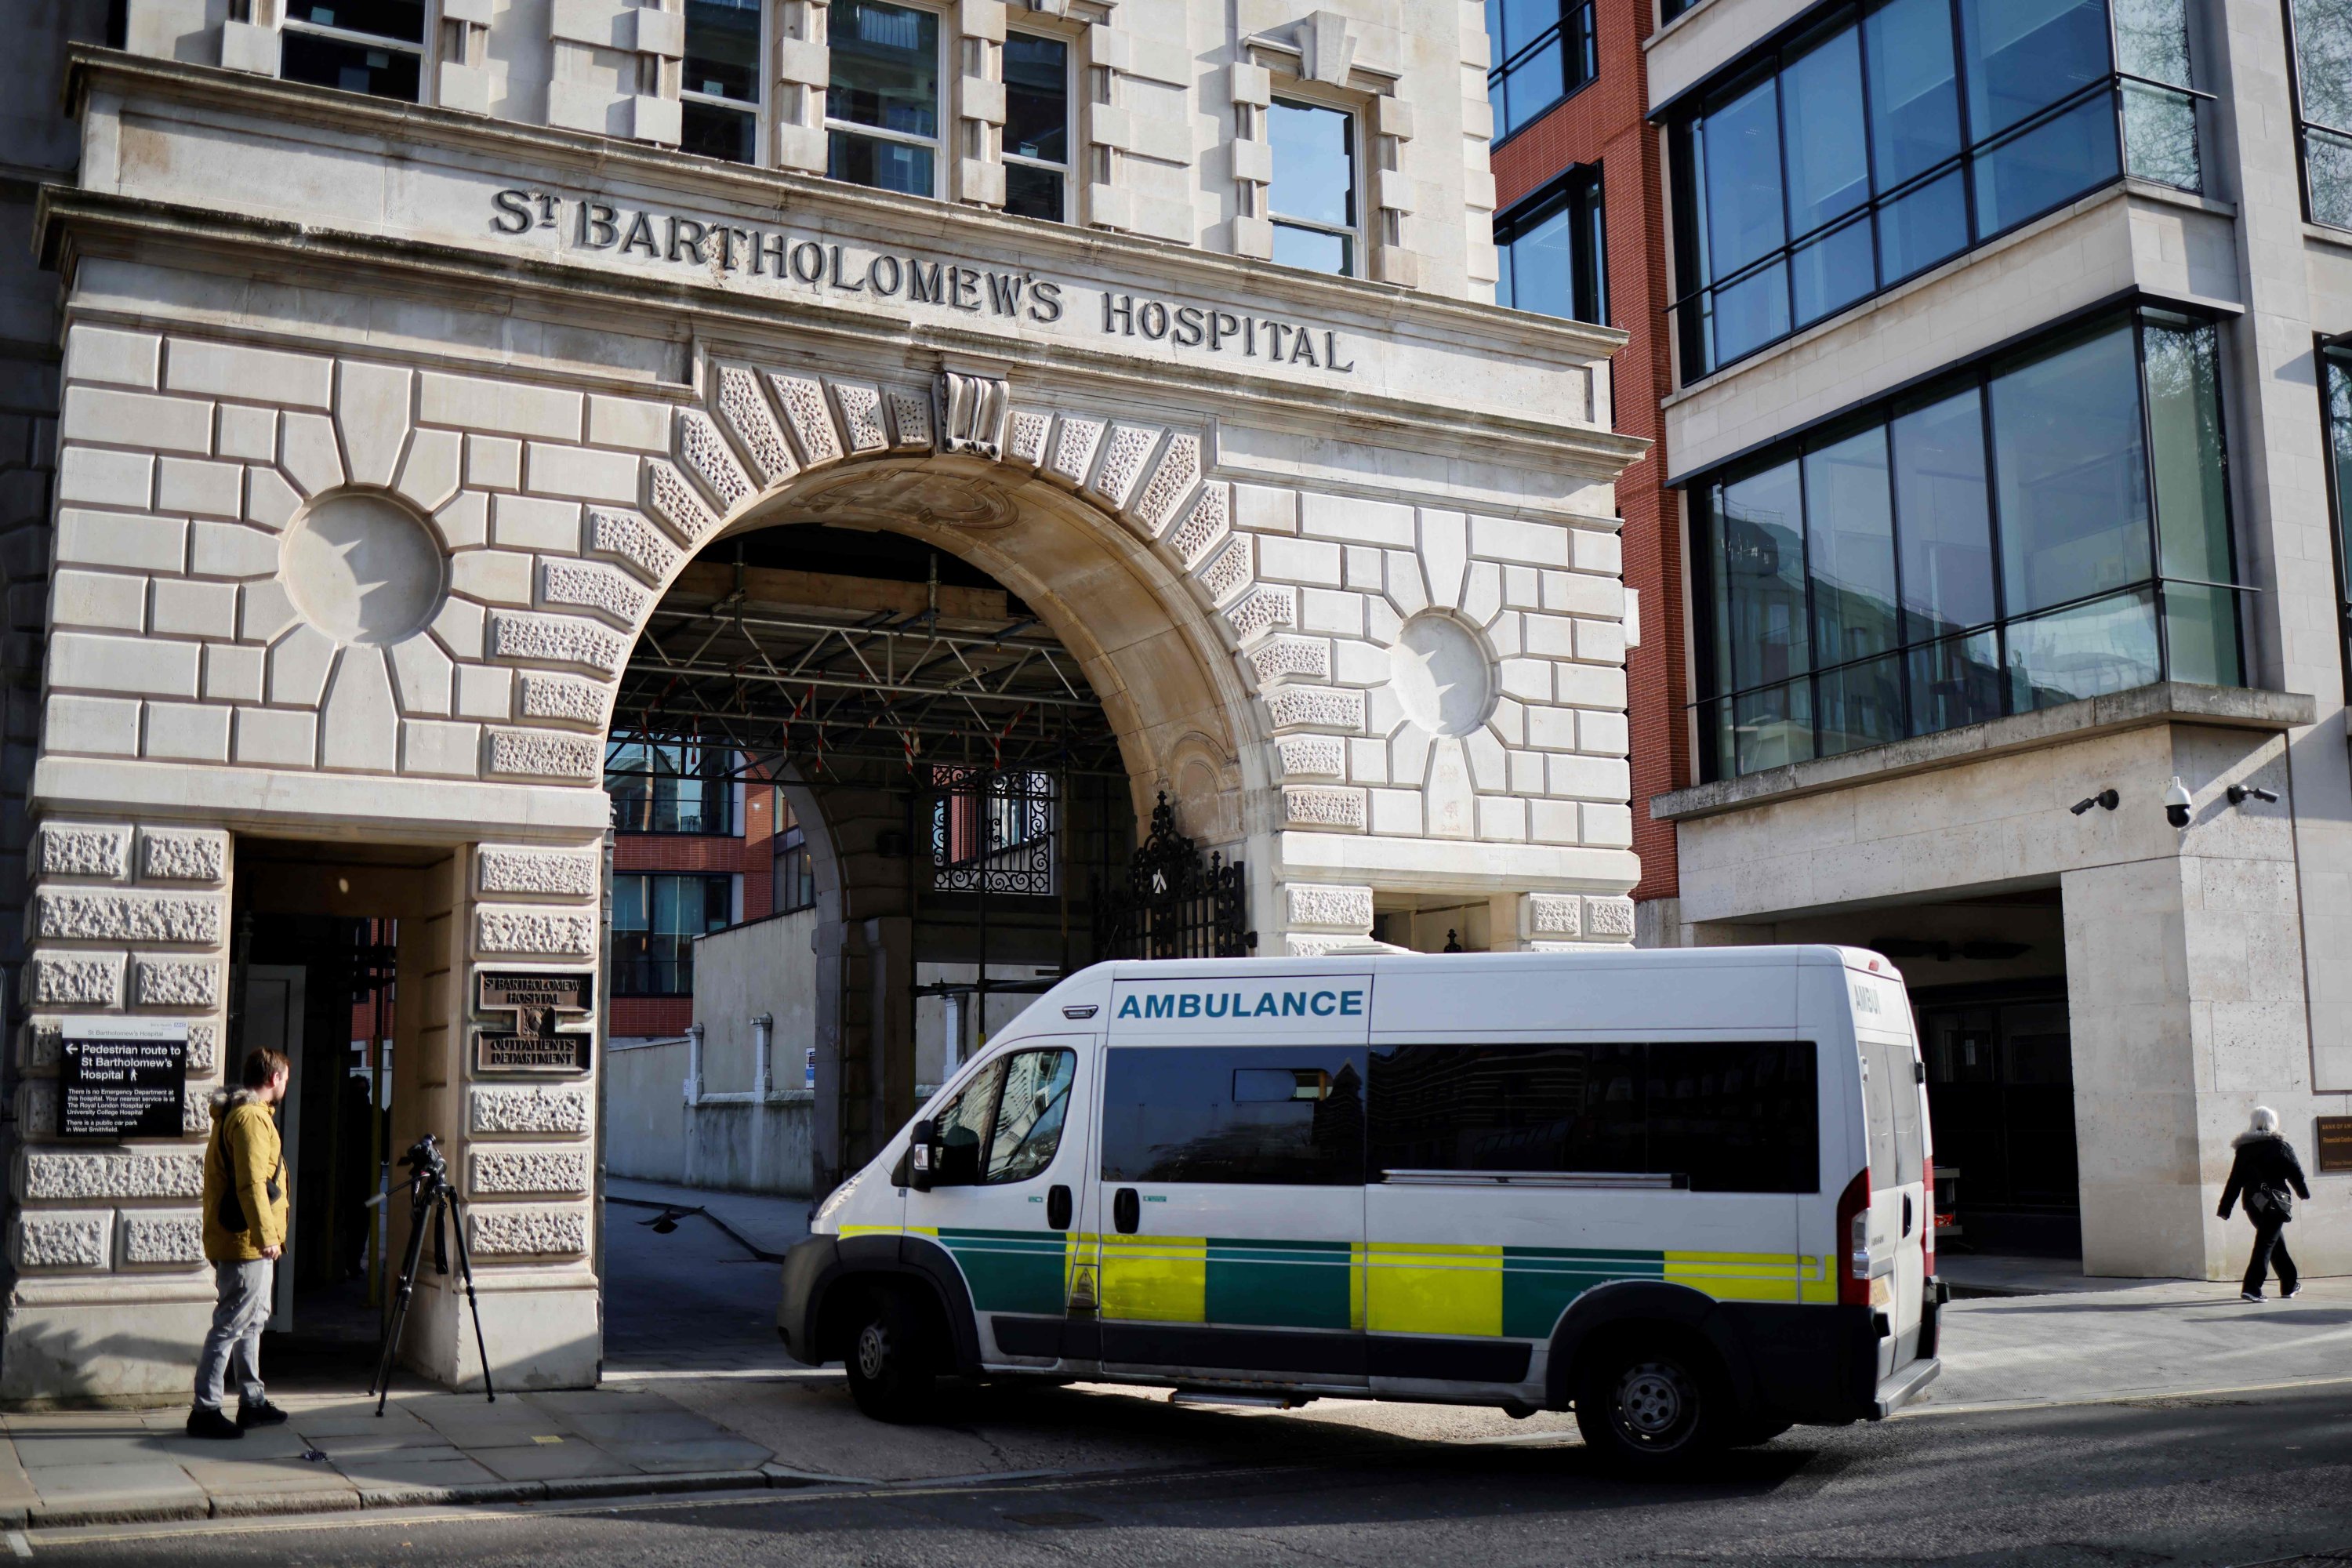 An ambulance arrives at St. Bartholomew's Hospital, commonly known as St. Bart's, where Britain's Prince Philip, Duke of Edinburgh, has been transferred to, central London, U.K., March 1, 2021. (AFP Photo)